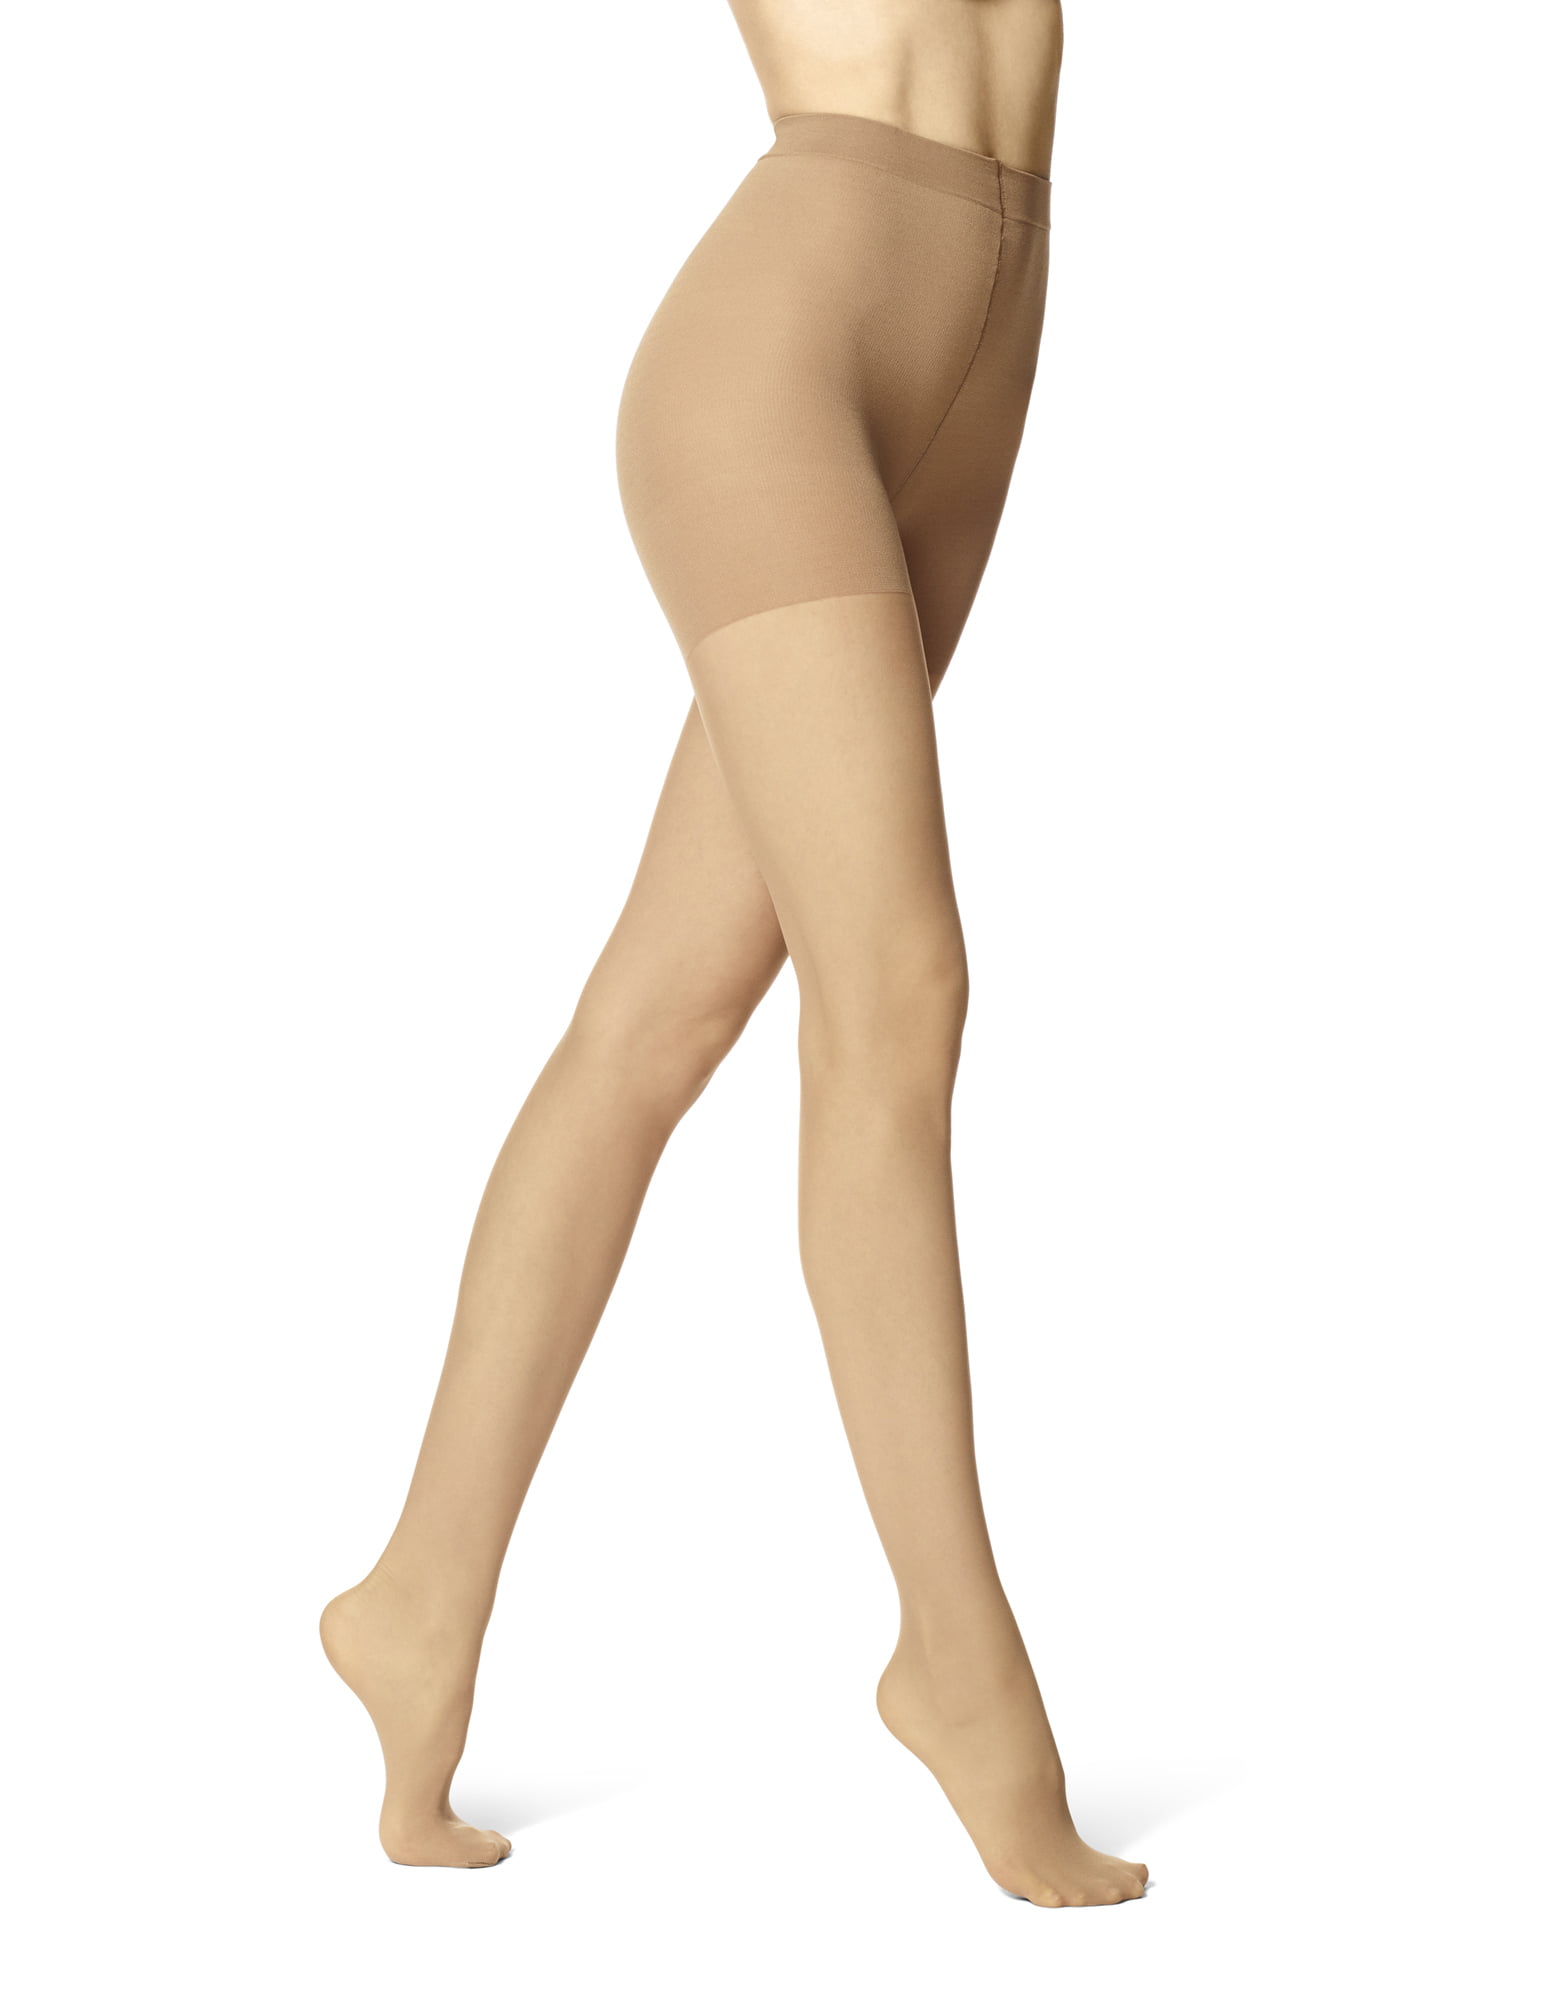 2* No Nonsense Great Shapes Enhanced Control Top Pantyhose BEIGE MIST, Size  B - Helia Beer Co